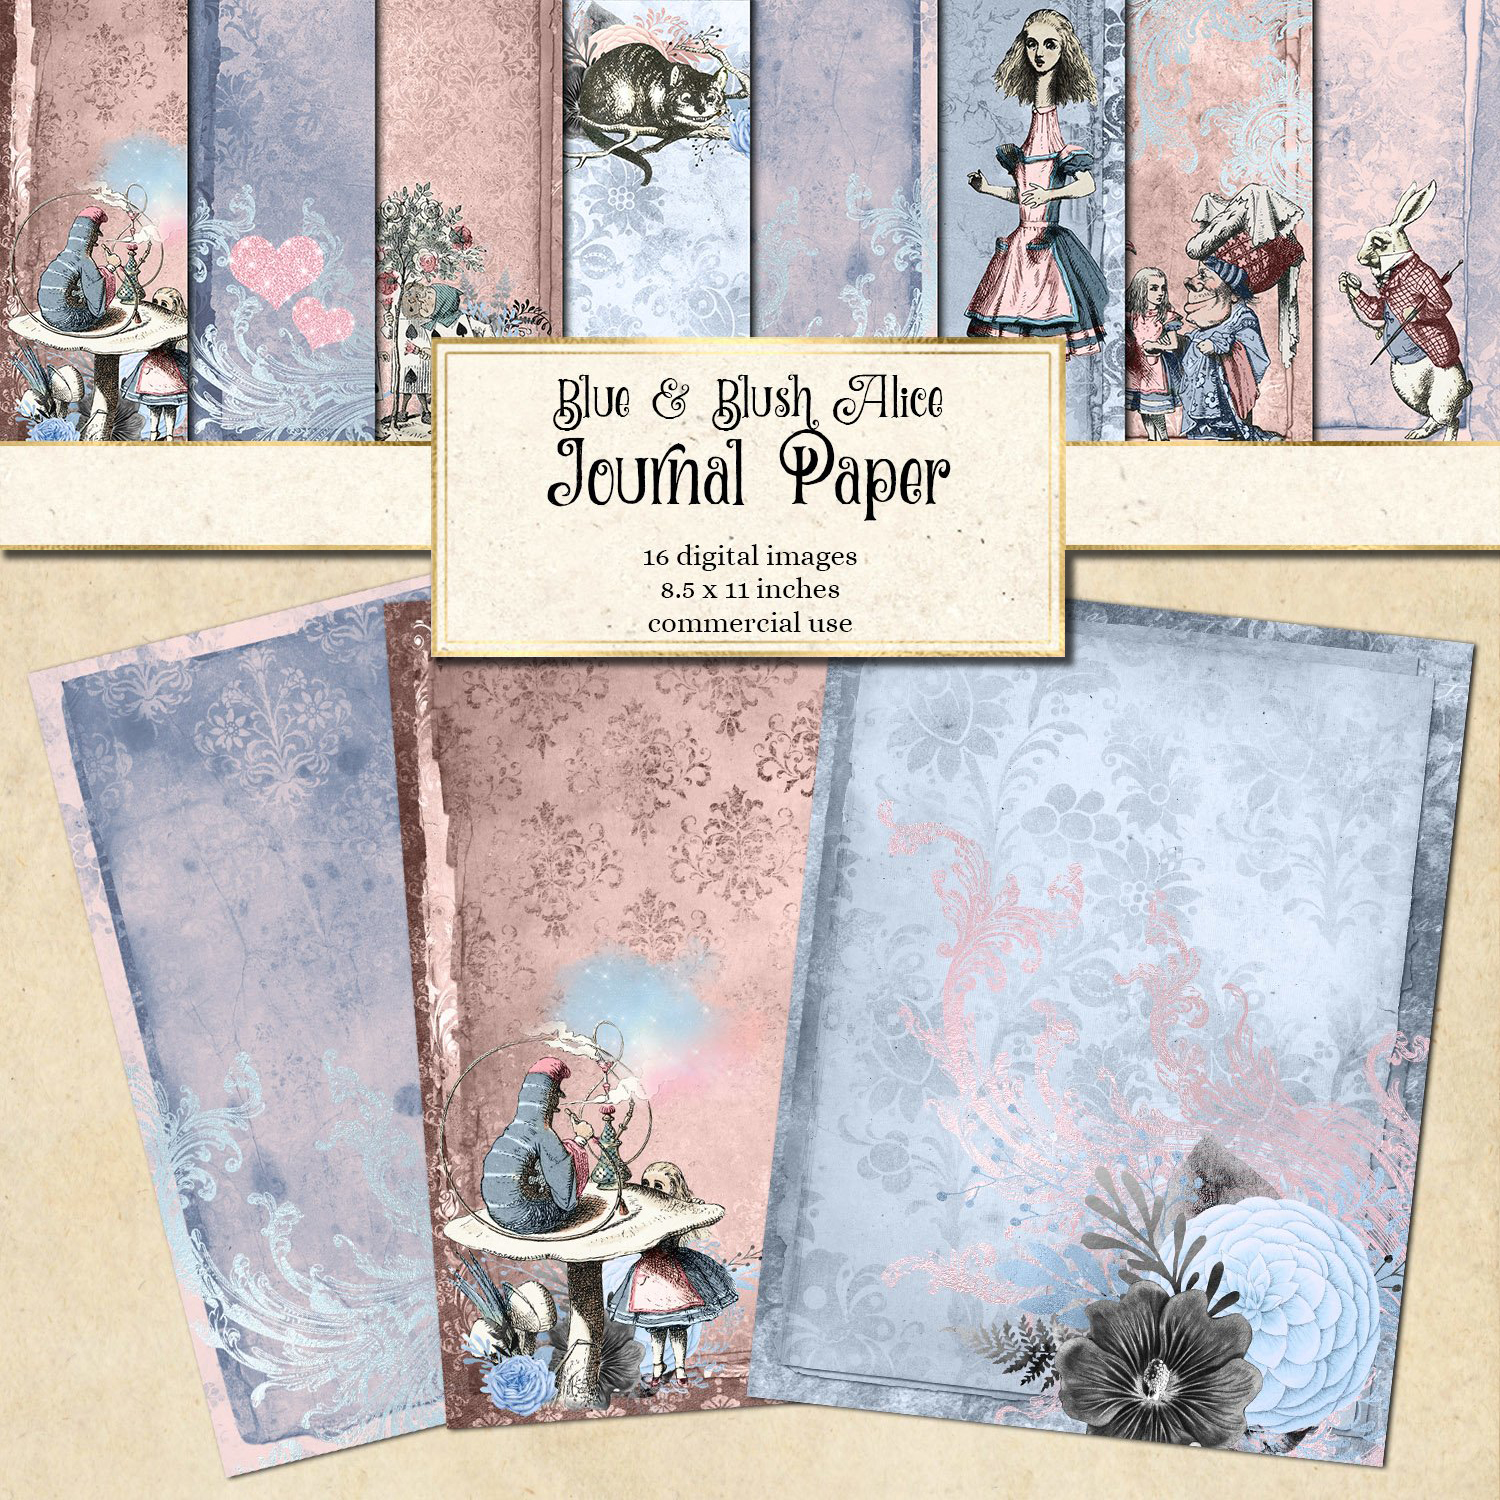 Prints of dusty blue and blush pink alice in wonderland jour.